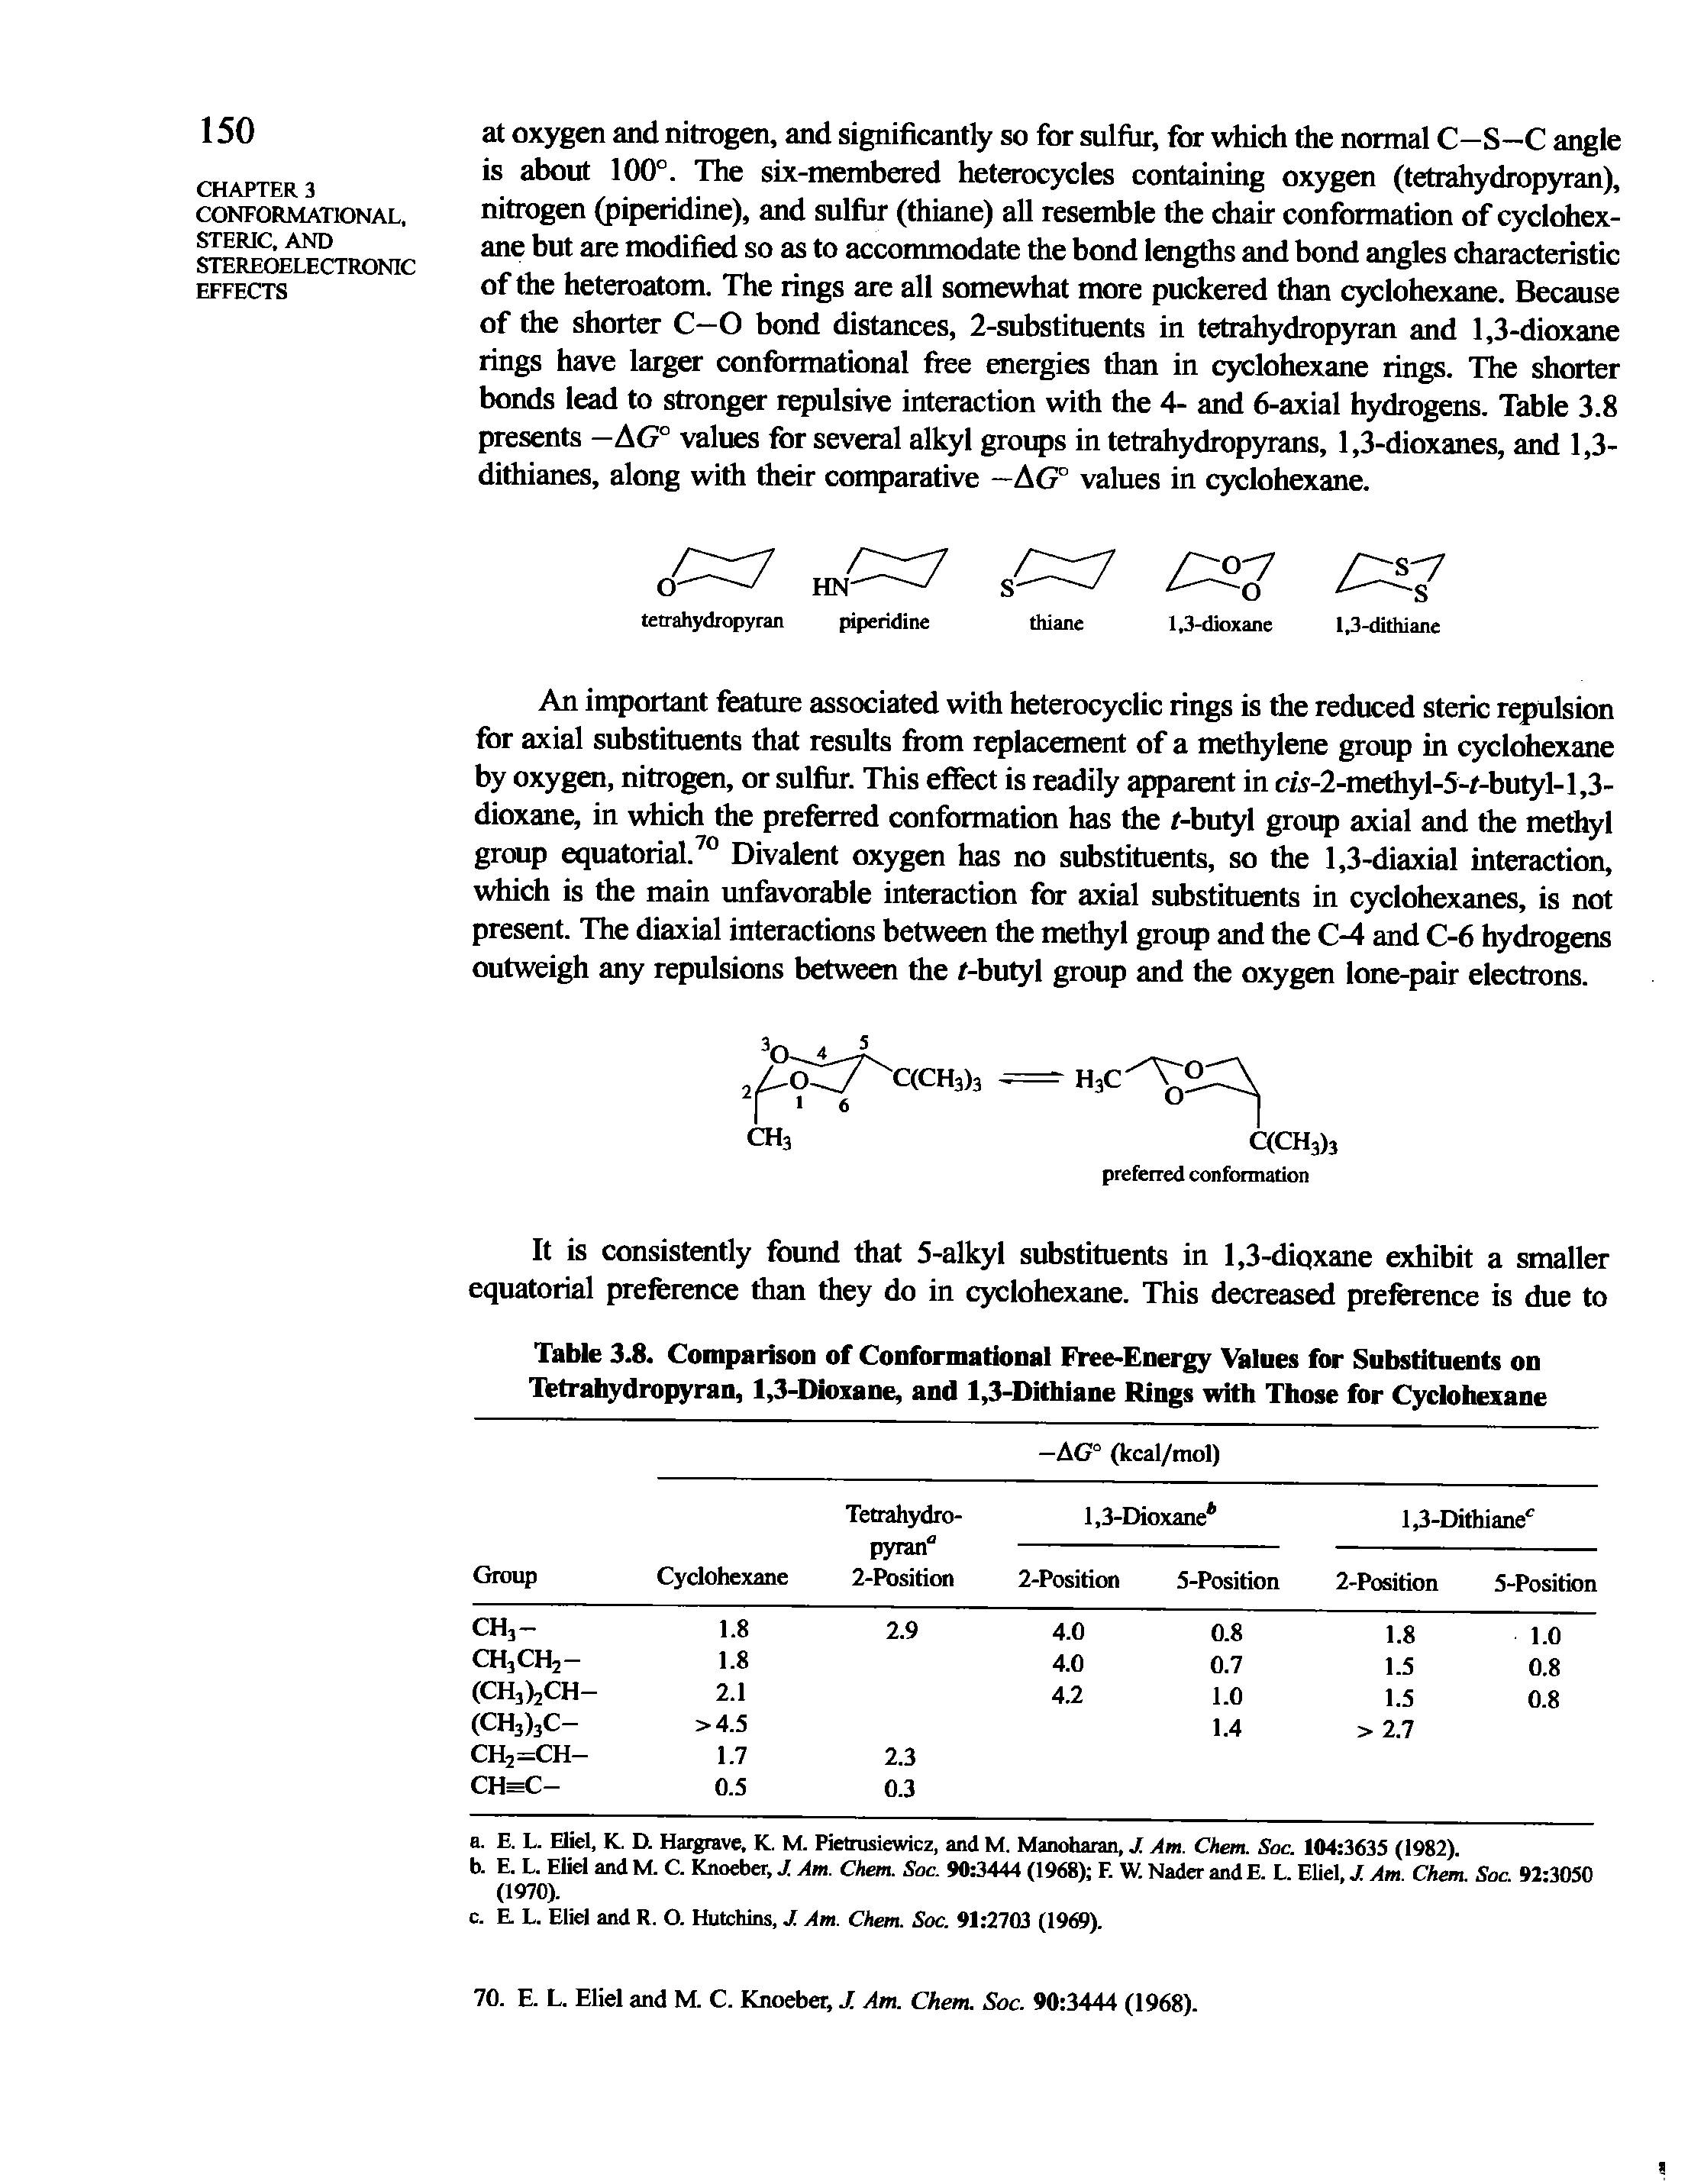 Table 3.8. Comparison of Conformational Free-Energy Values for Substituents on Tetrahydropyran, 1,3-Dioxane, and 1,3-Dithiane Rings with Those for Cyclohexane...